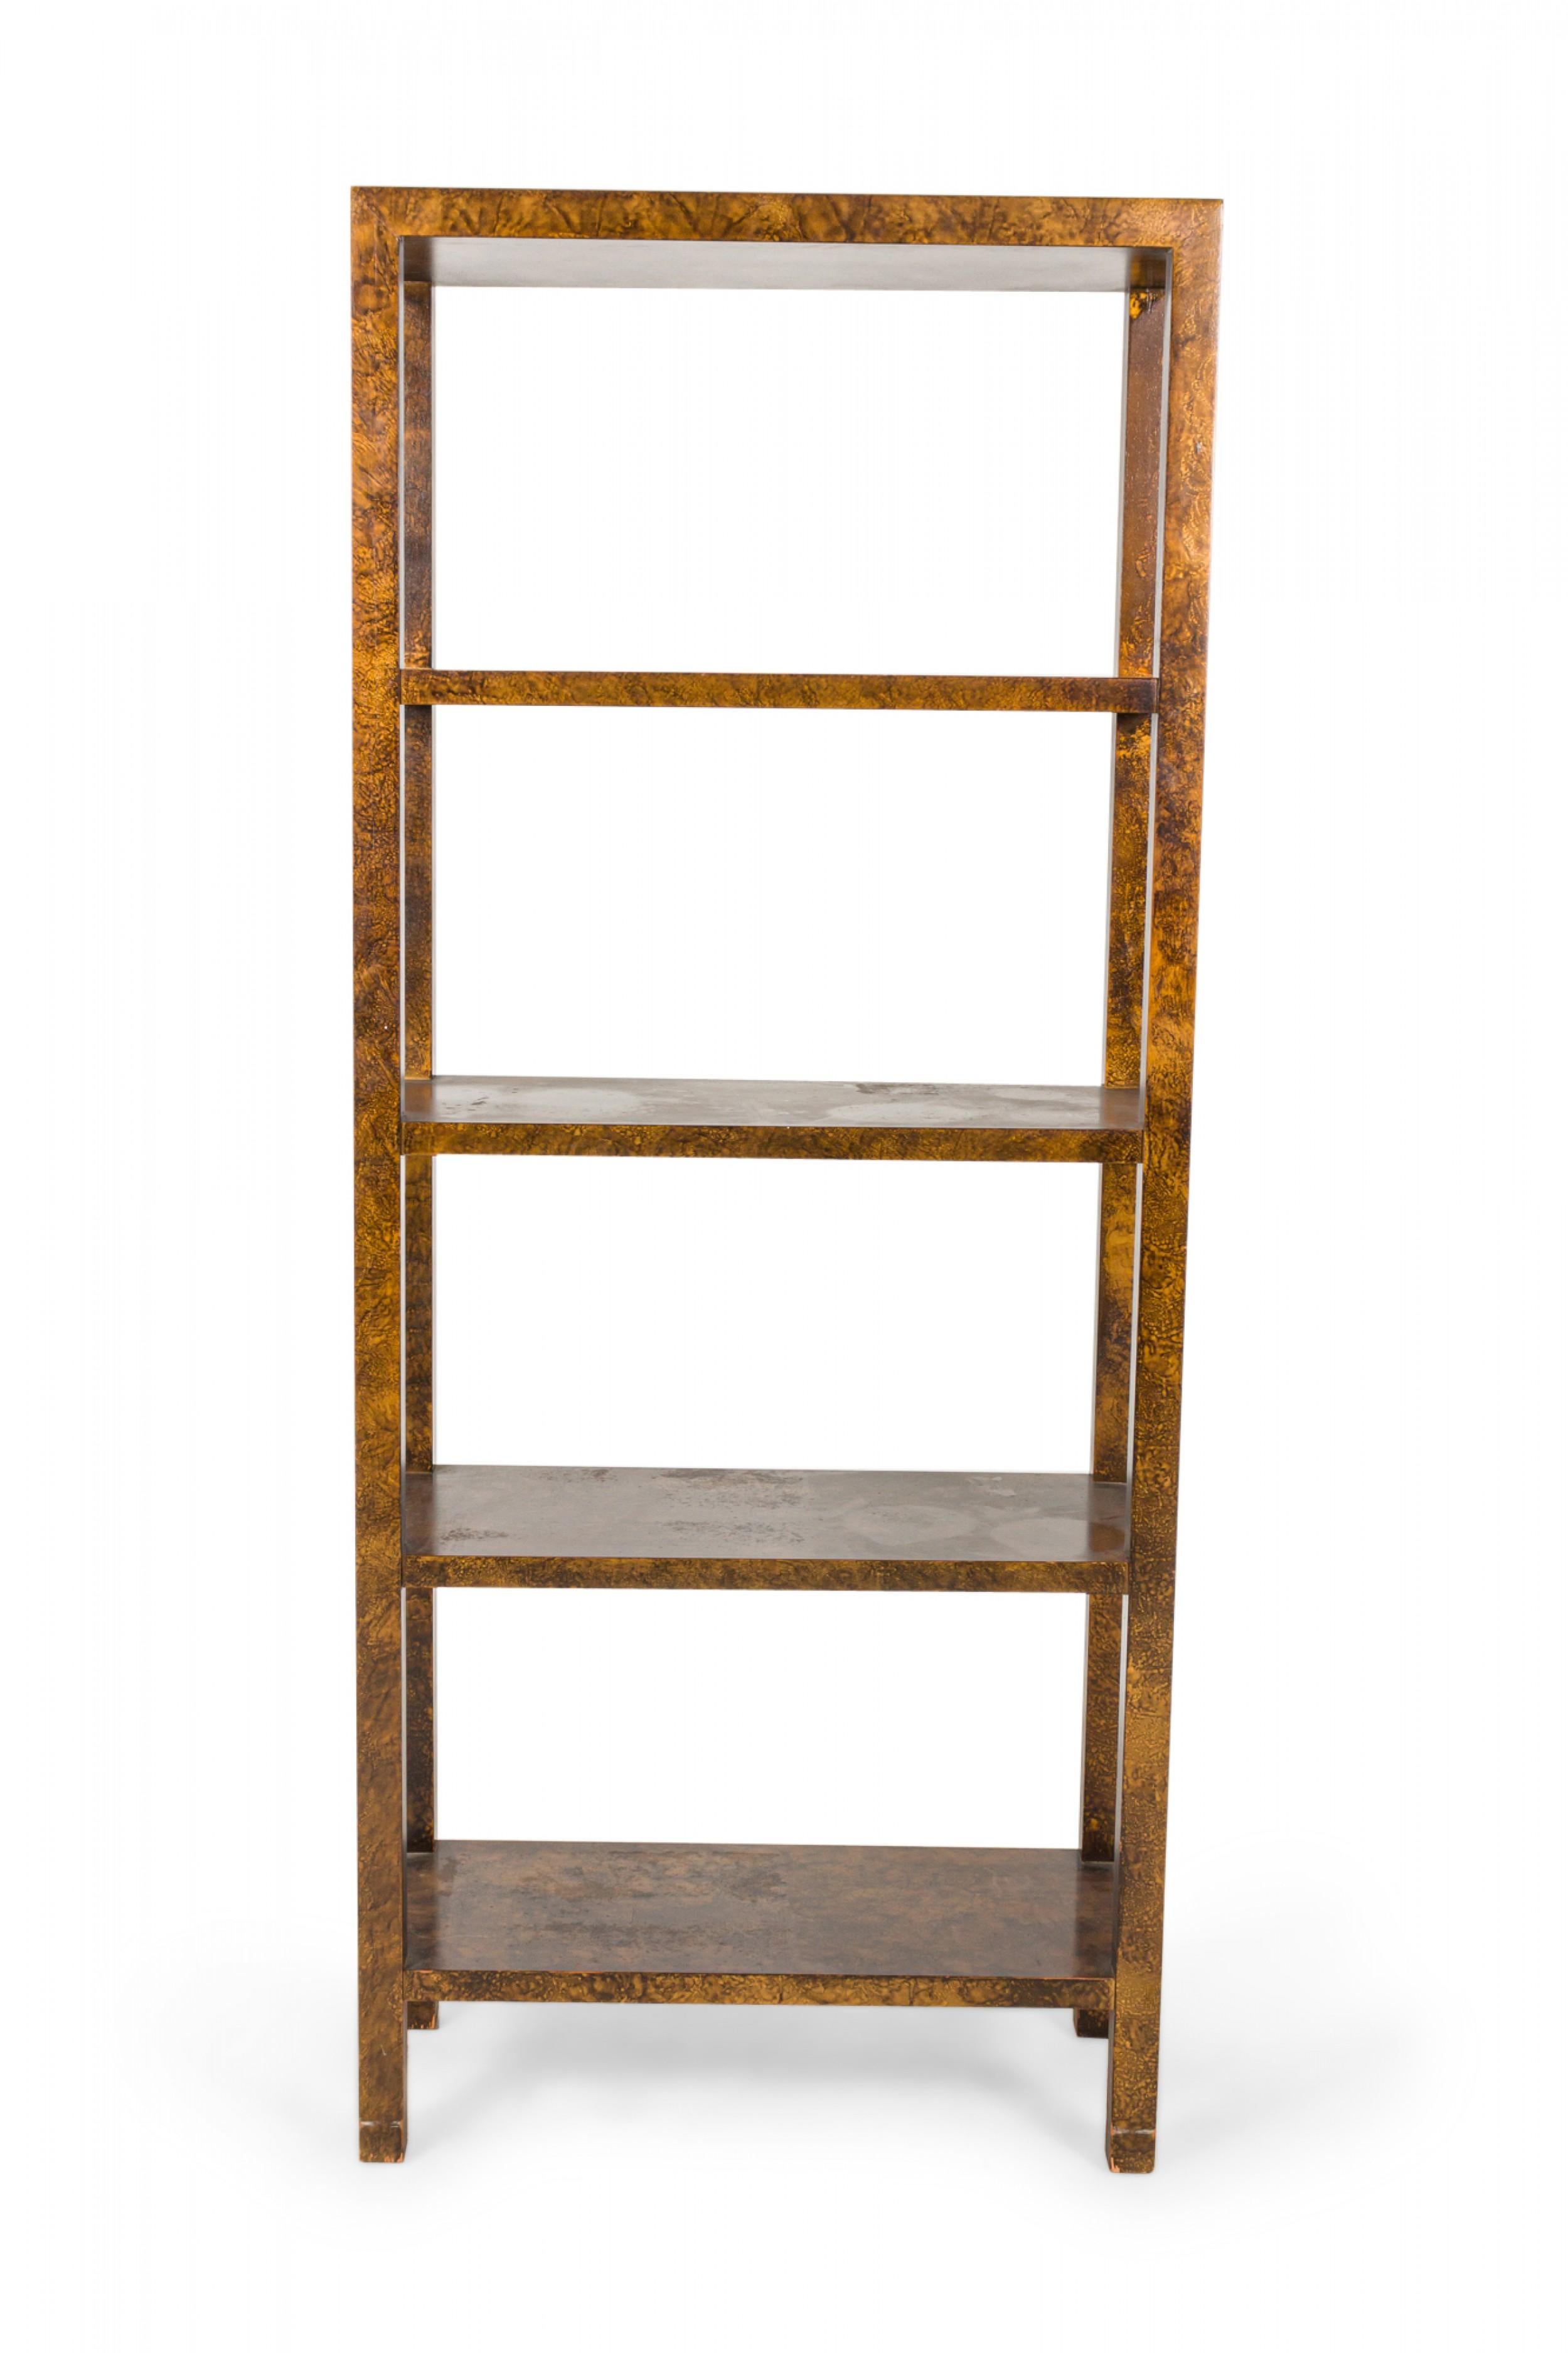 Lane Furniture Oil Drop Lacquer Four Shelf Bookcase / Etagere In Good Condition For Sale In New York, NY